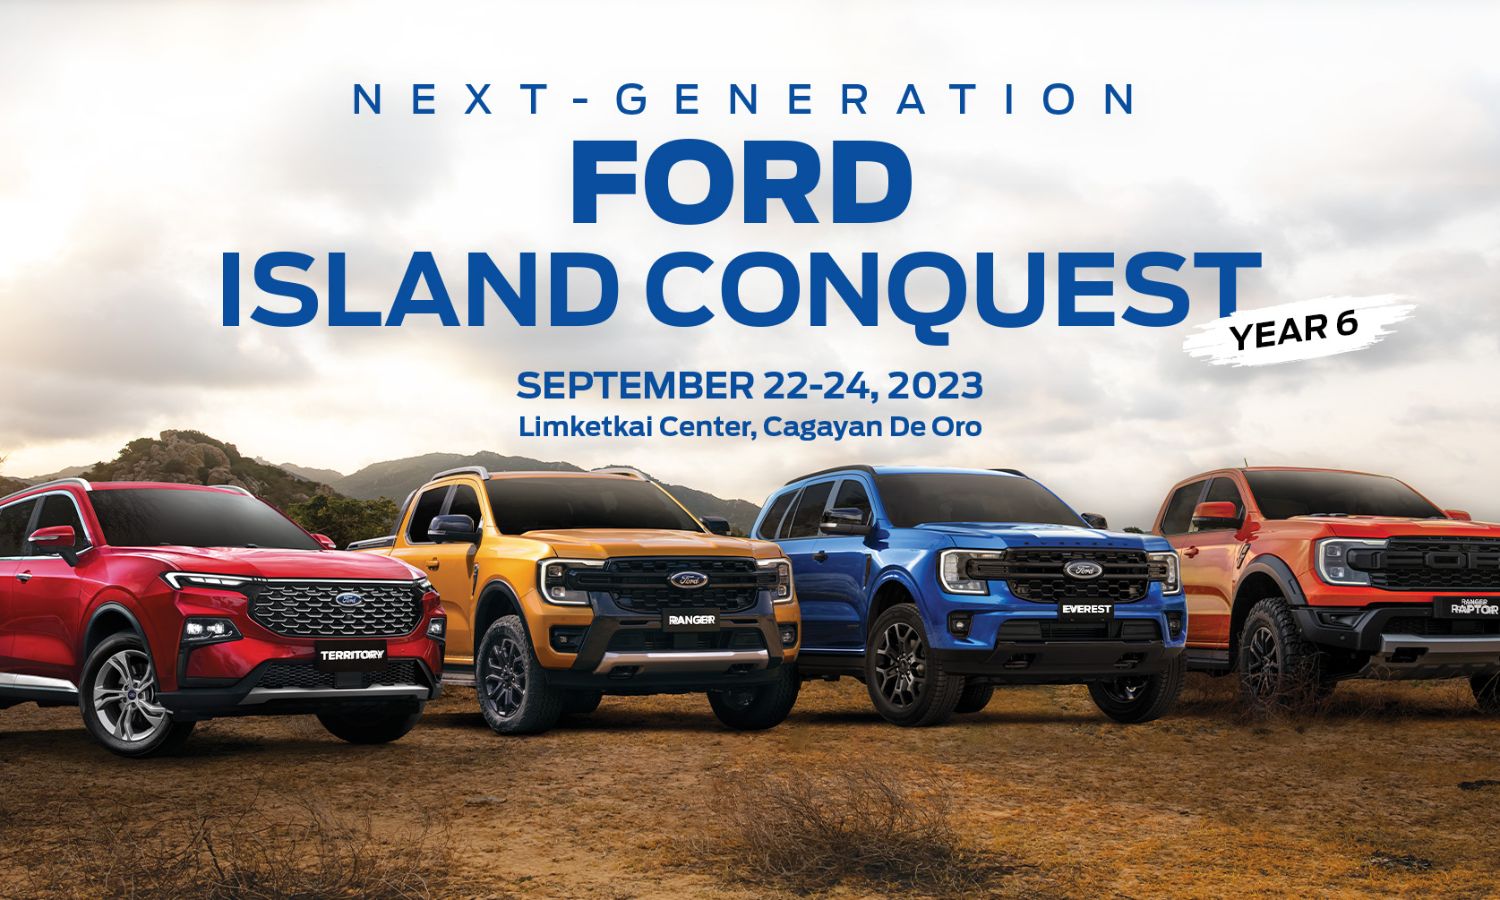 Ford Island Conquest heads to Cagayan de Oro on Sept. 22-24